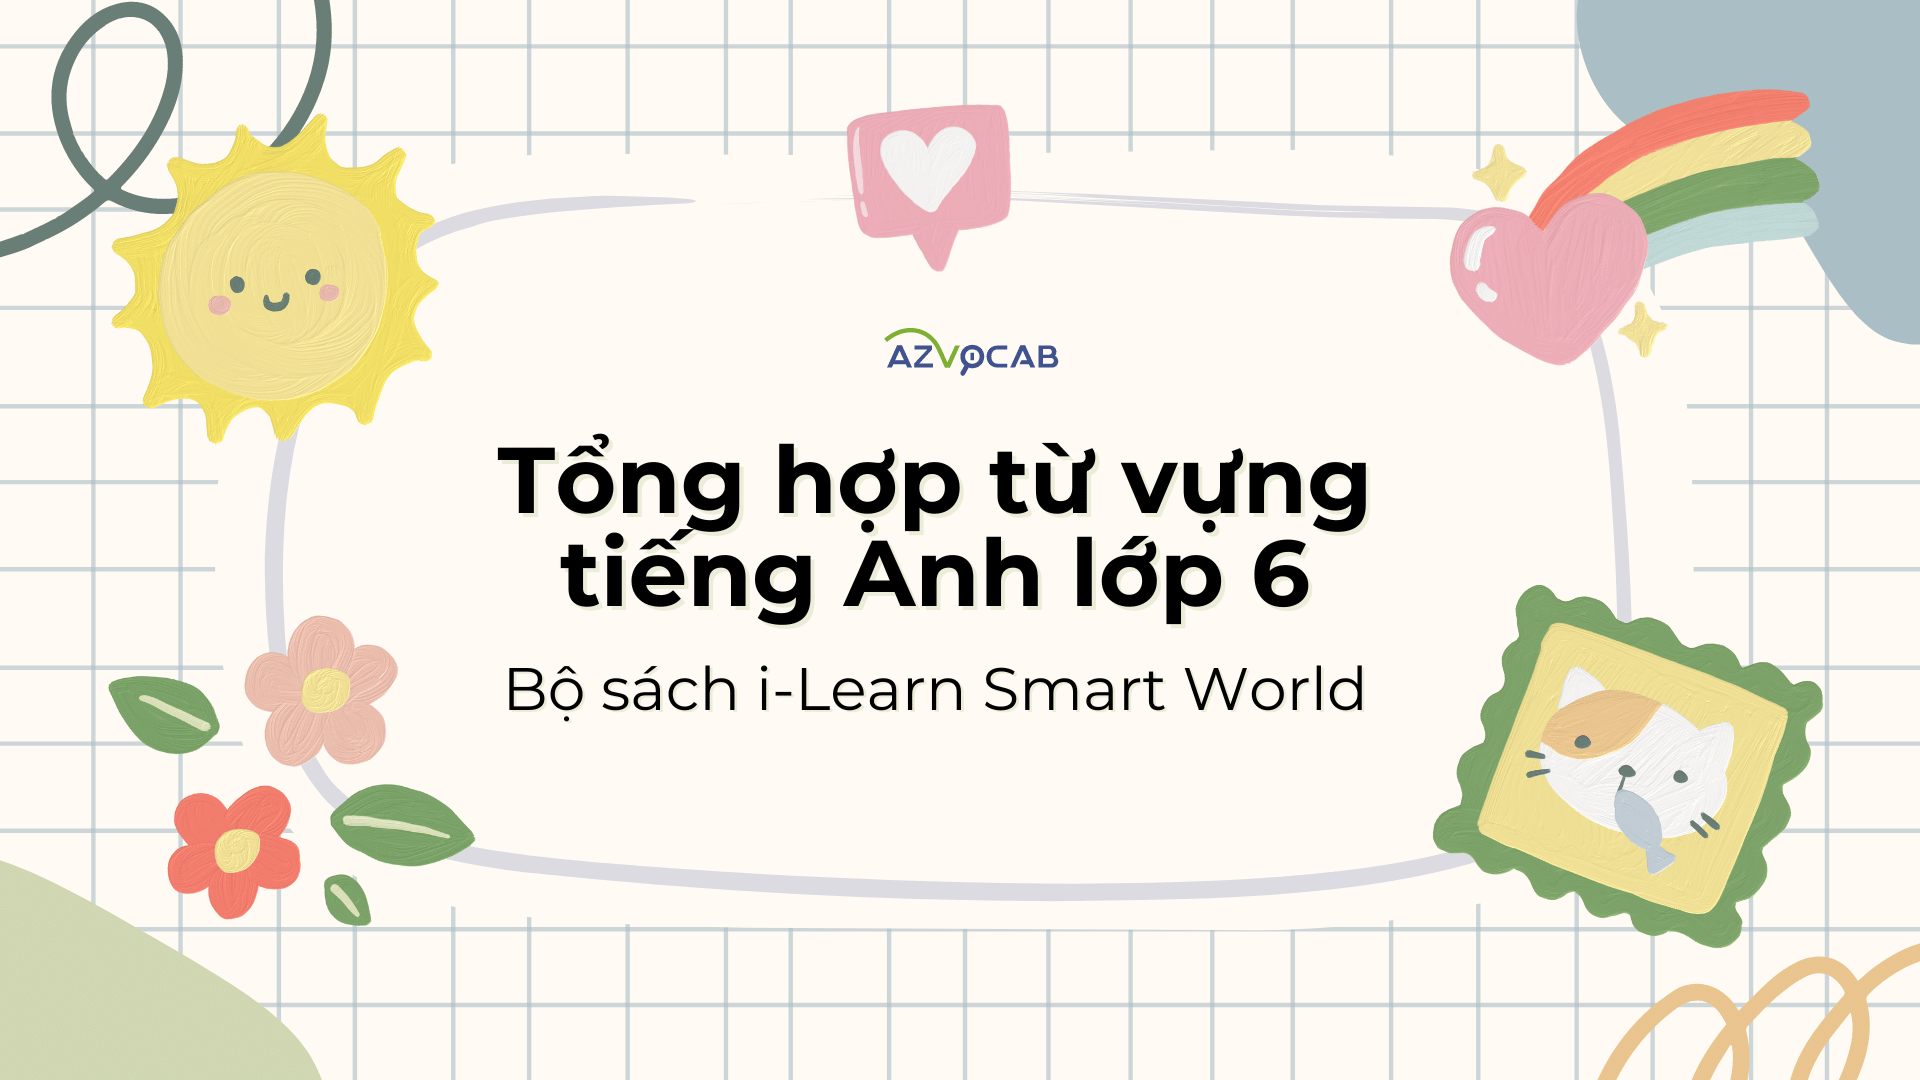 Tiếng Anh lớp 6 i-Learn Smart World